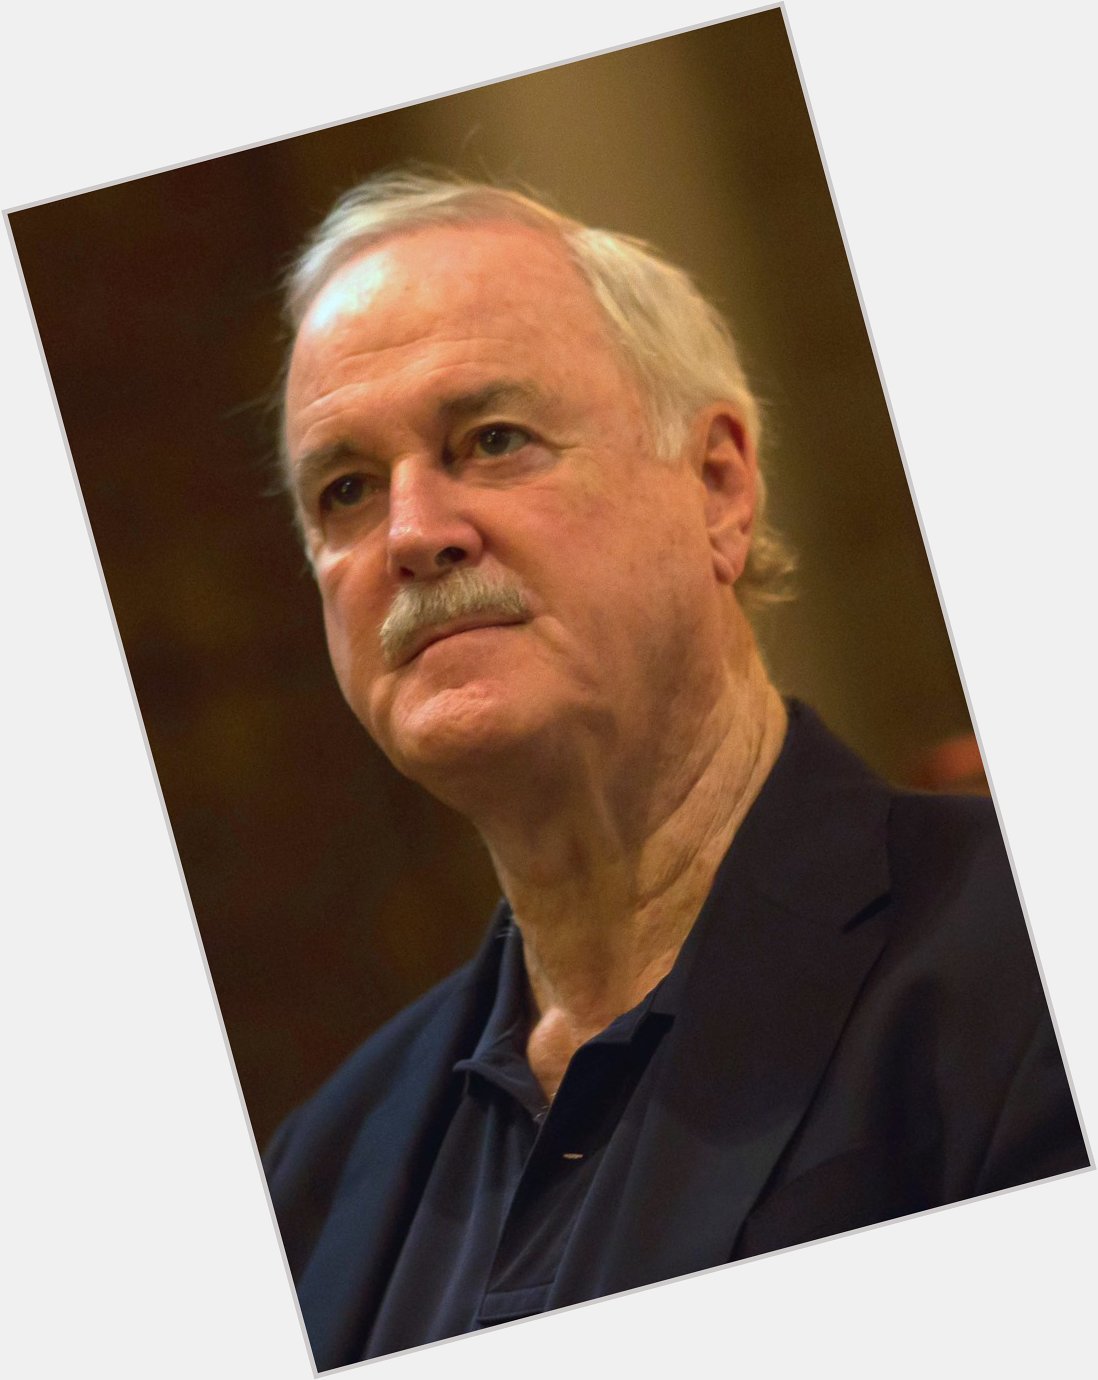  Happy birthday to John Cleese who portrayed Nearly Headless Nick in the films! 